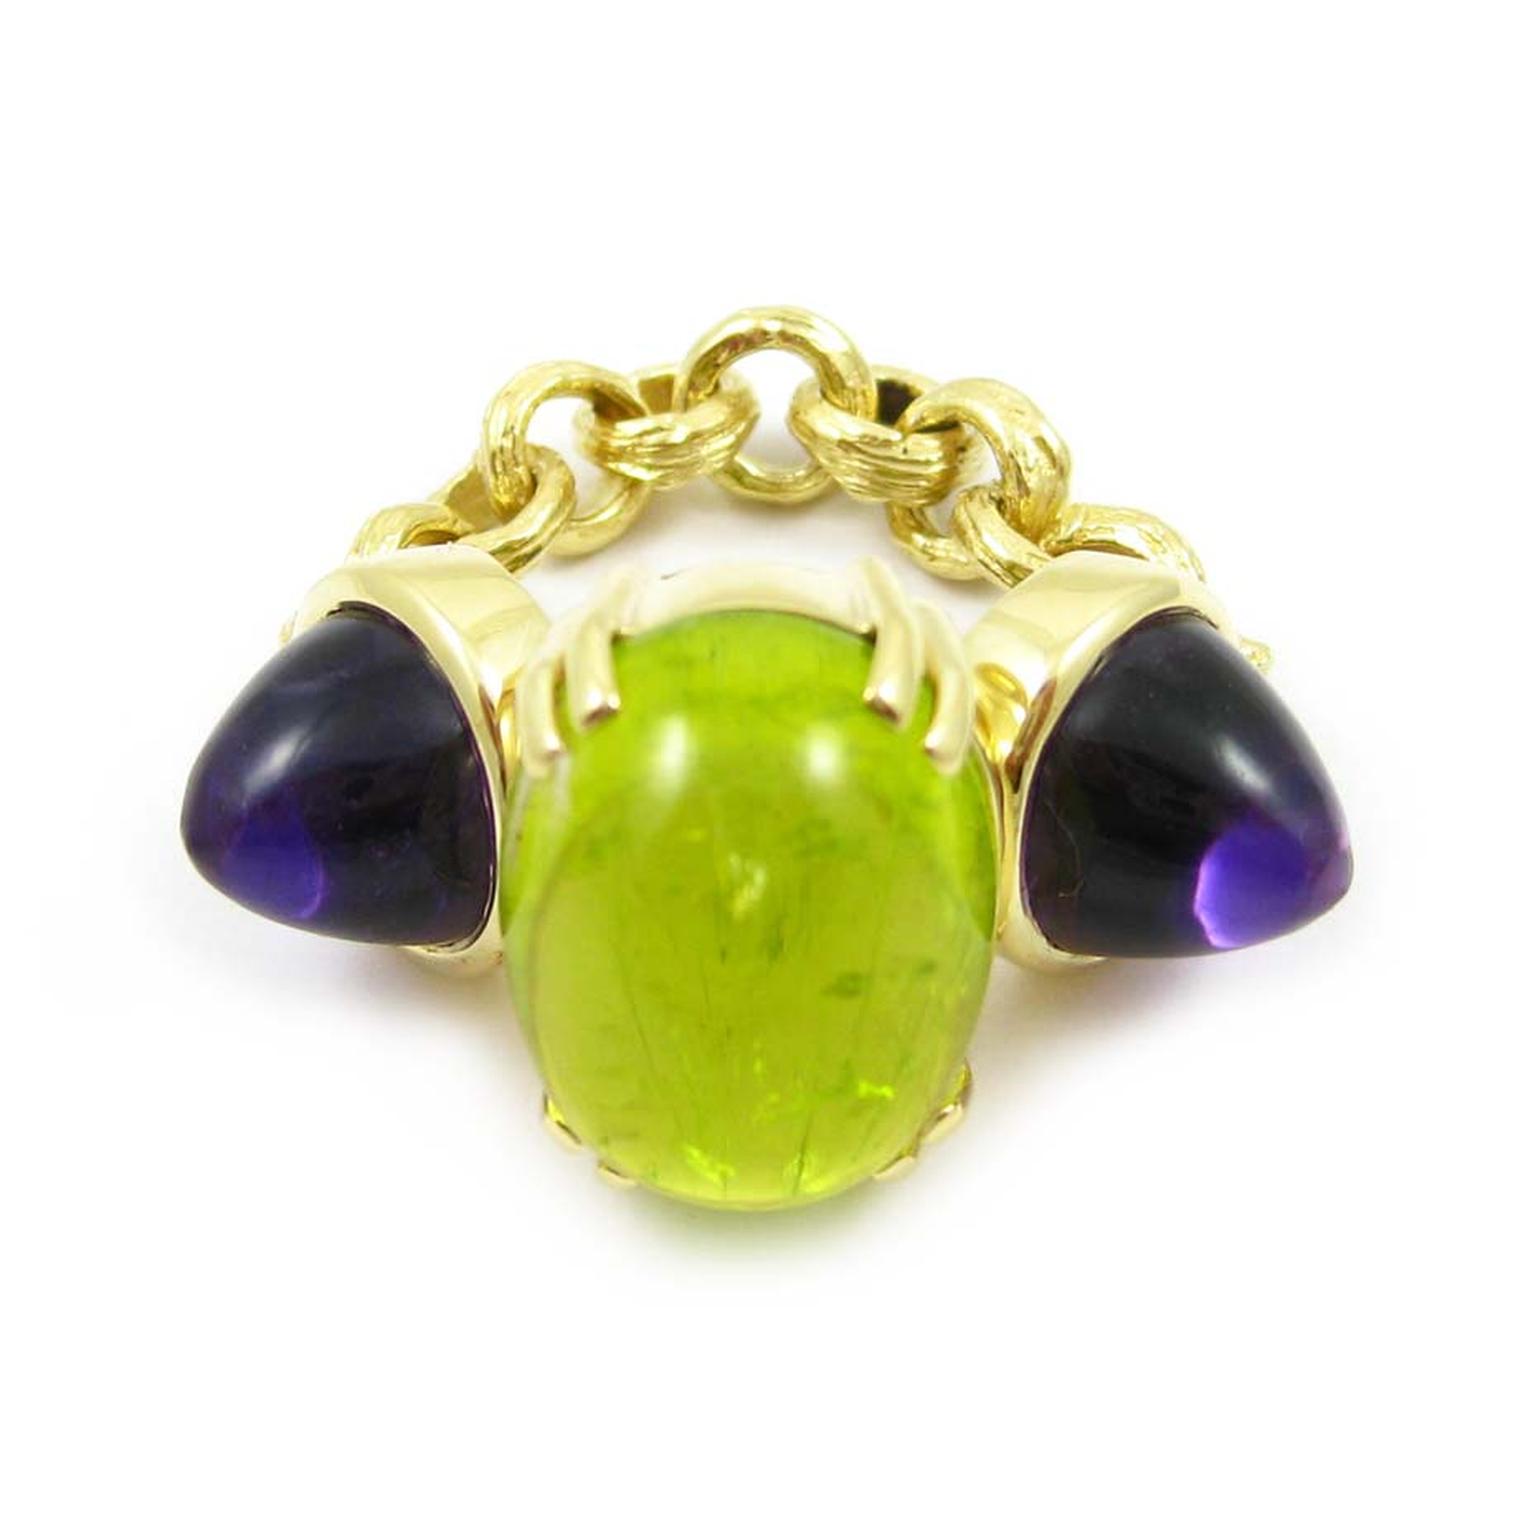 K. Brunini Chains of Love Twig ring in yellow gold with a central 14.53ct canary tourmaline and two amethyst bullet cabochons ($27,840).